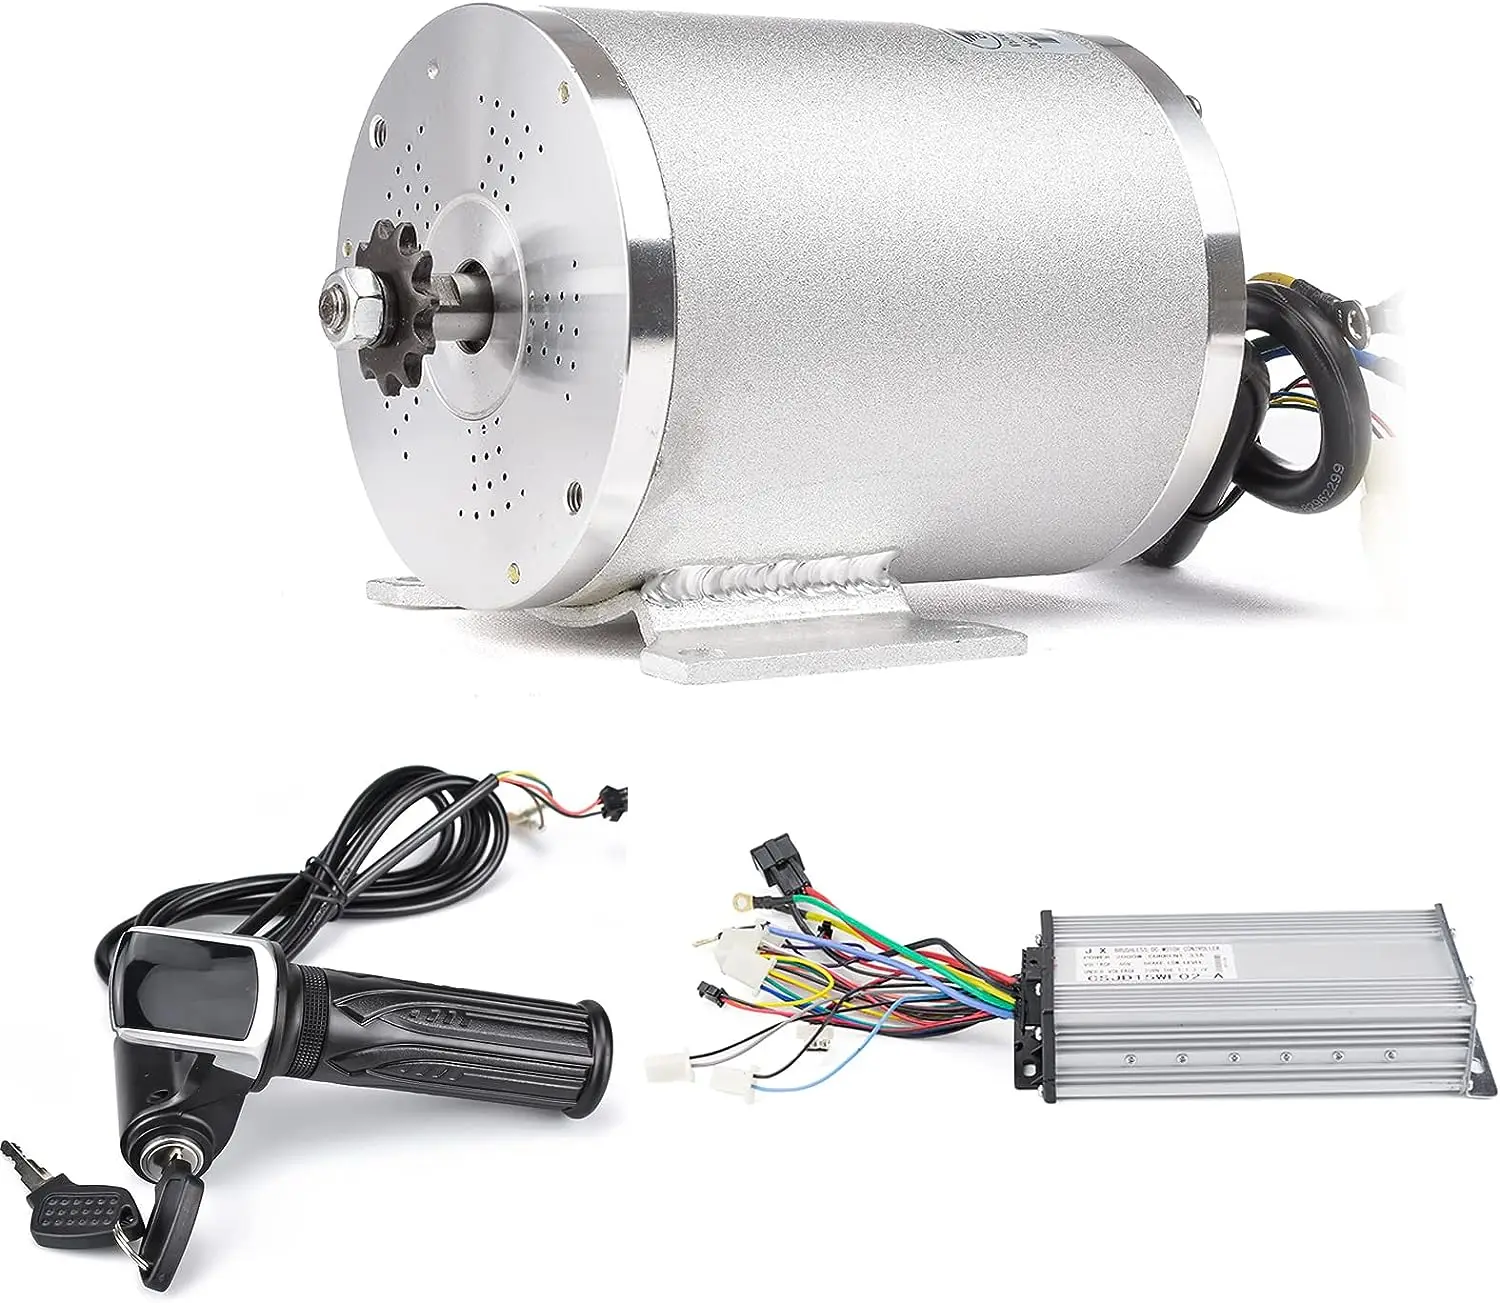 

DC Motor Complete Kit, 48V 2000W 4300RPM High Speed Motor, With 33A 15 Mosfet Controller, Battery Display LCD Throttle, Scooter